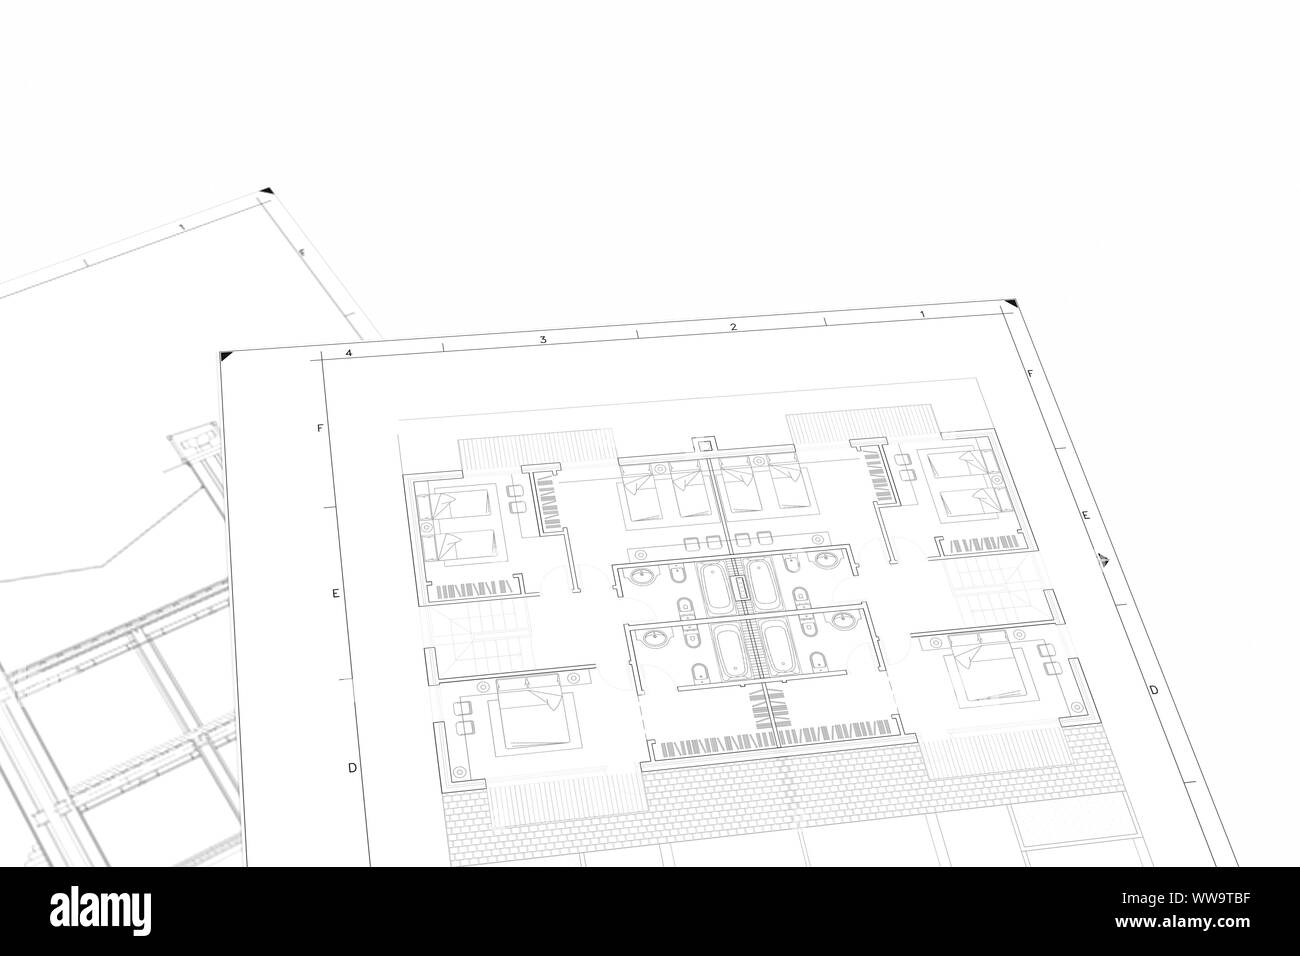 A Part plan of architectural project on the white background Stock Photo